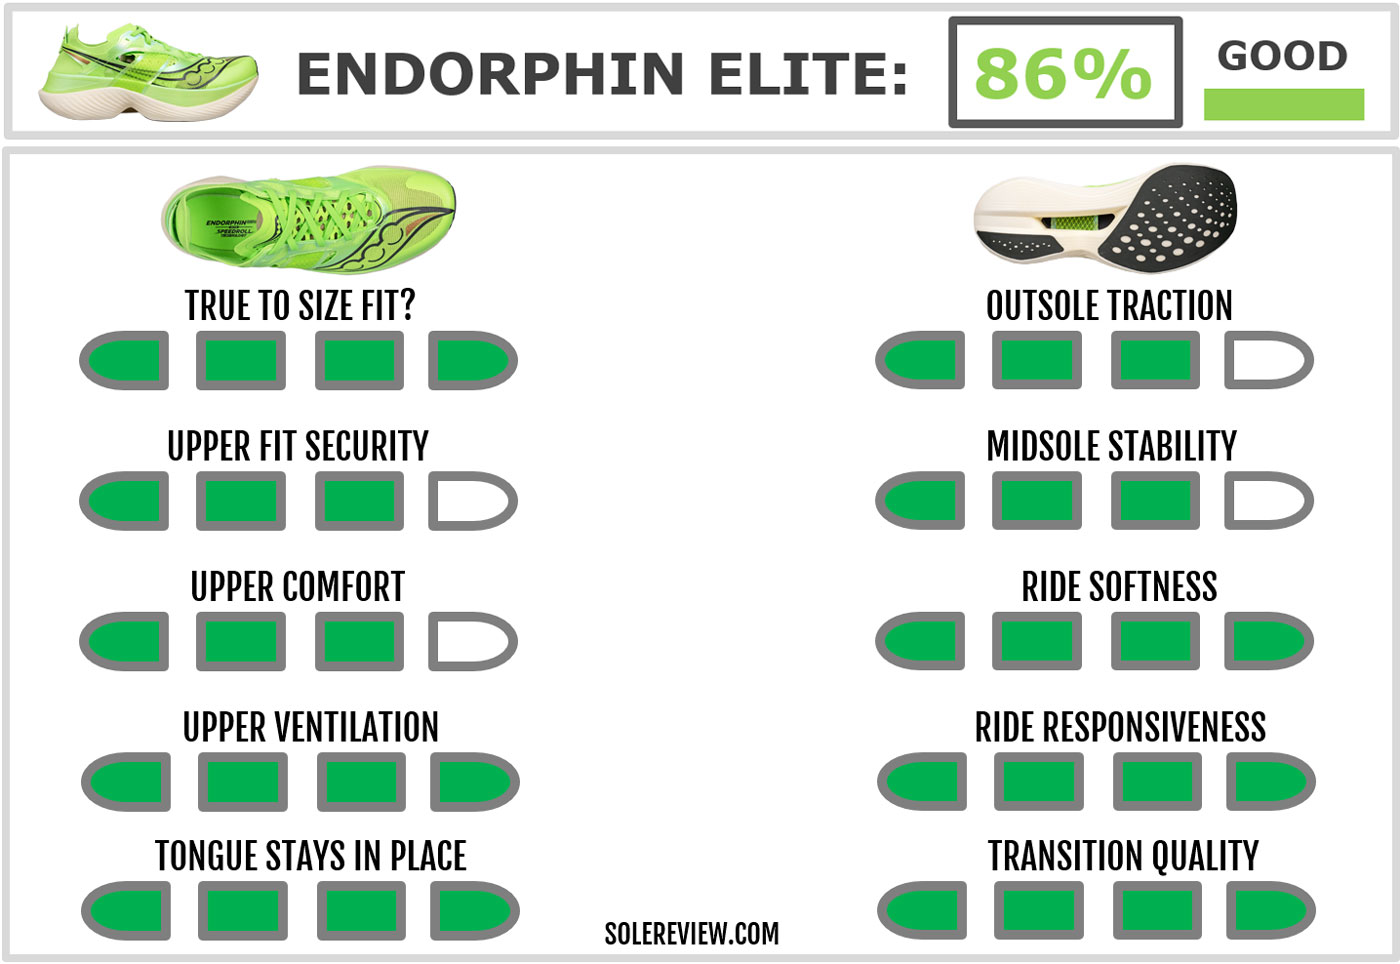 The rating score of the Saucony Endorphin Elite.